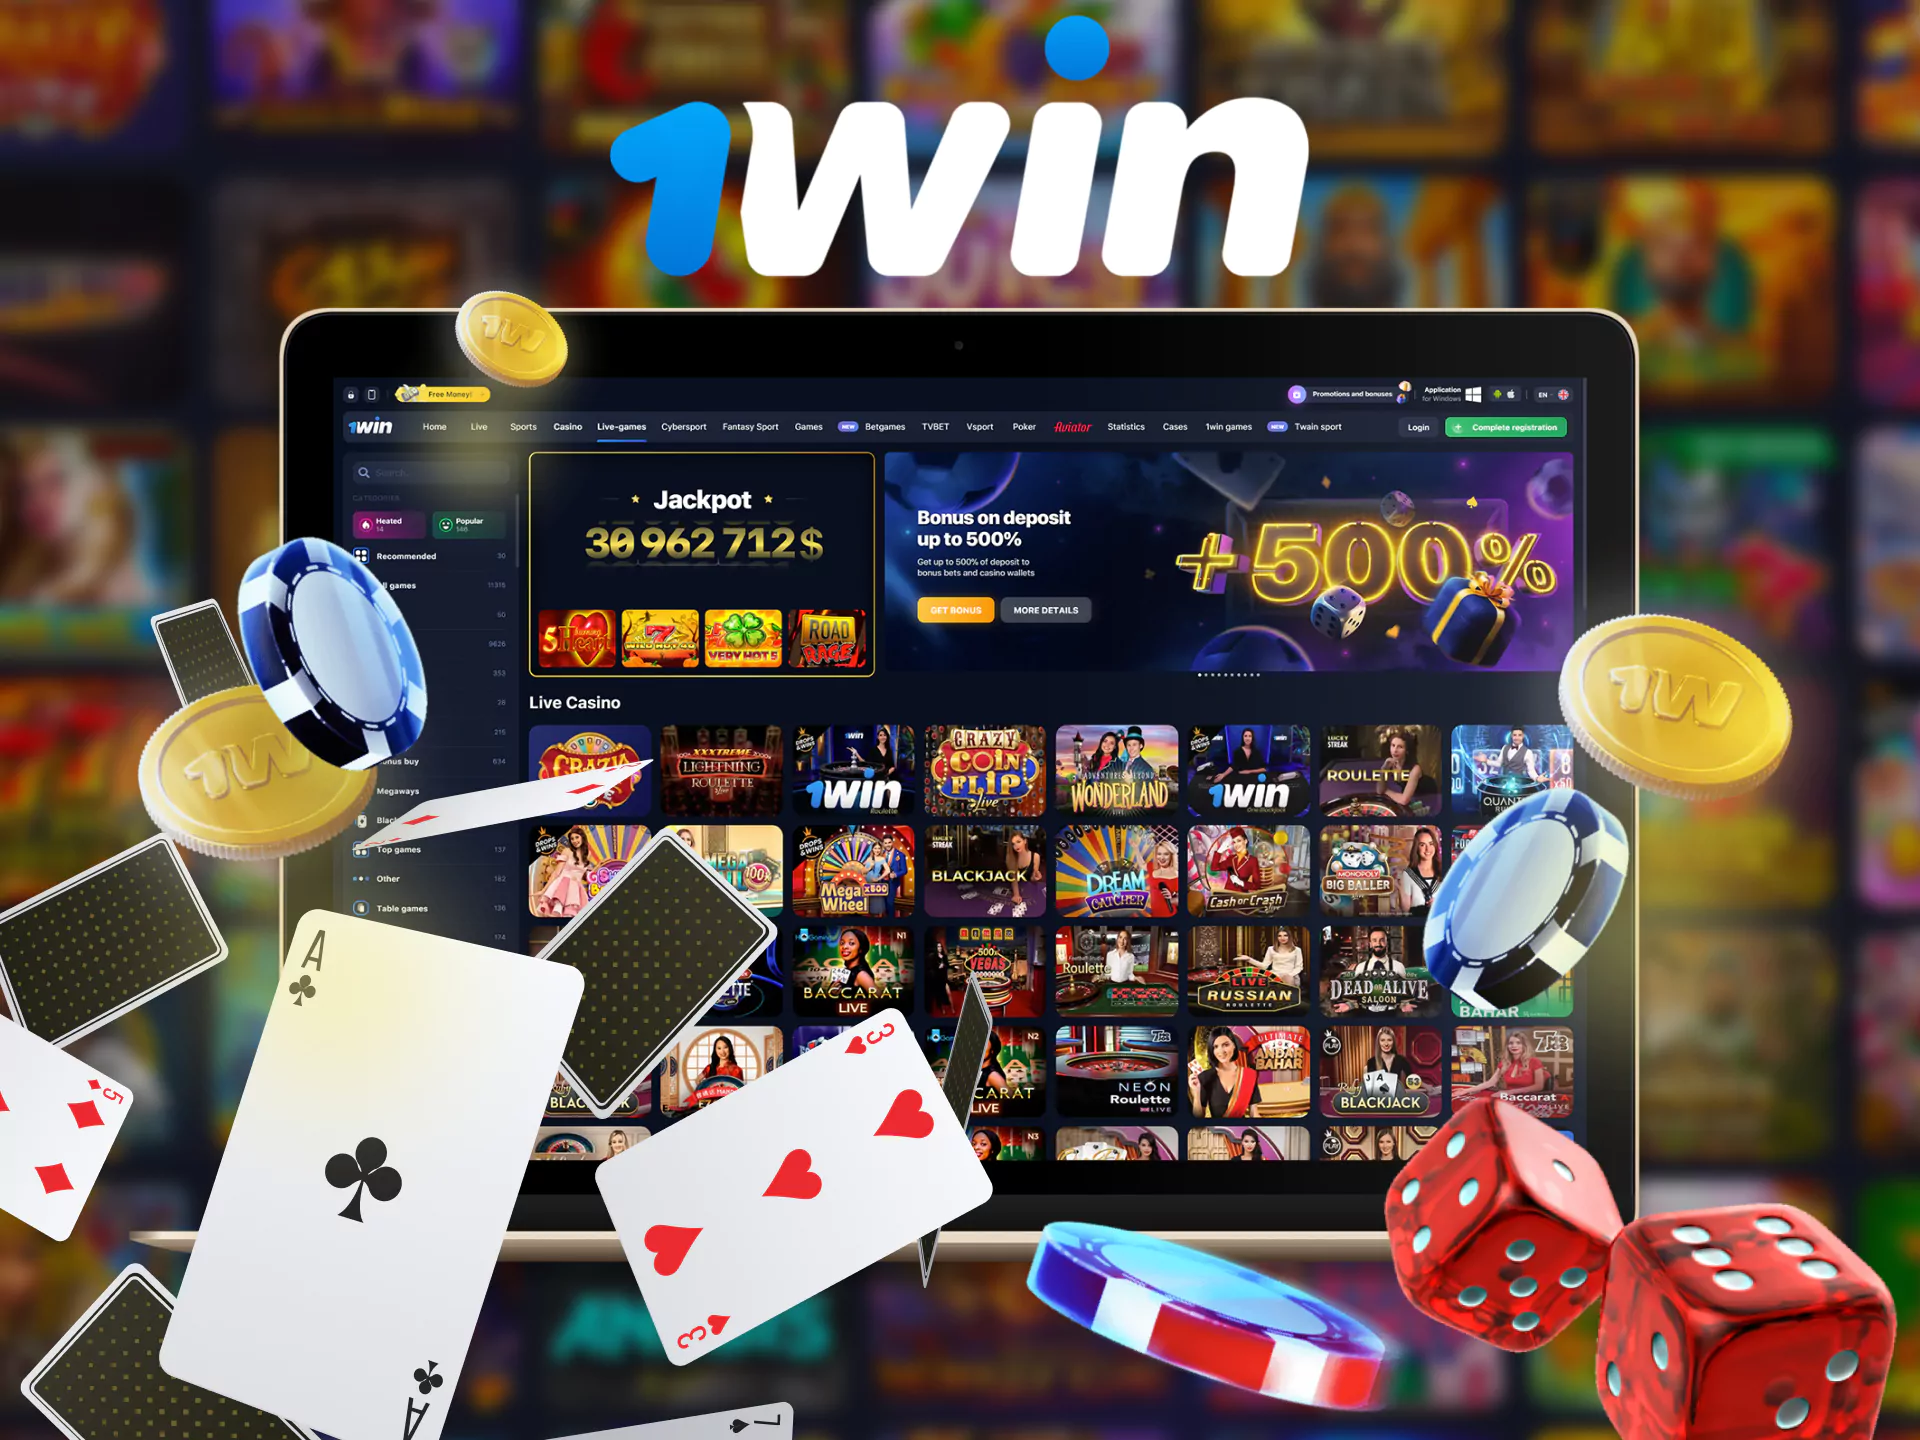 On 1Win you can play different games in the Live Casino.